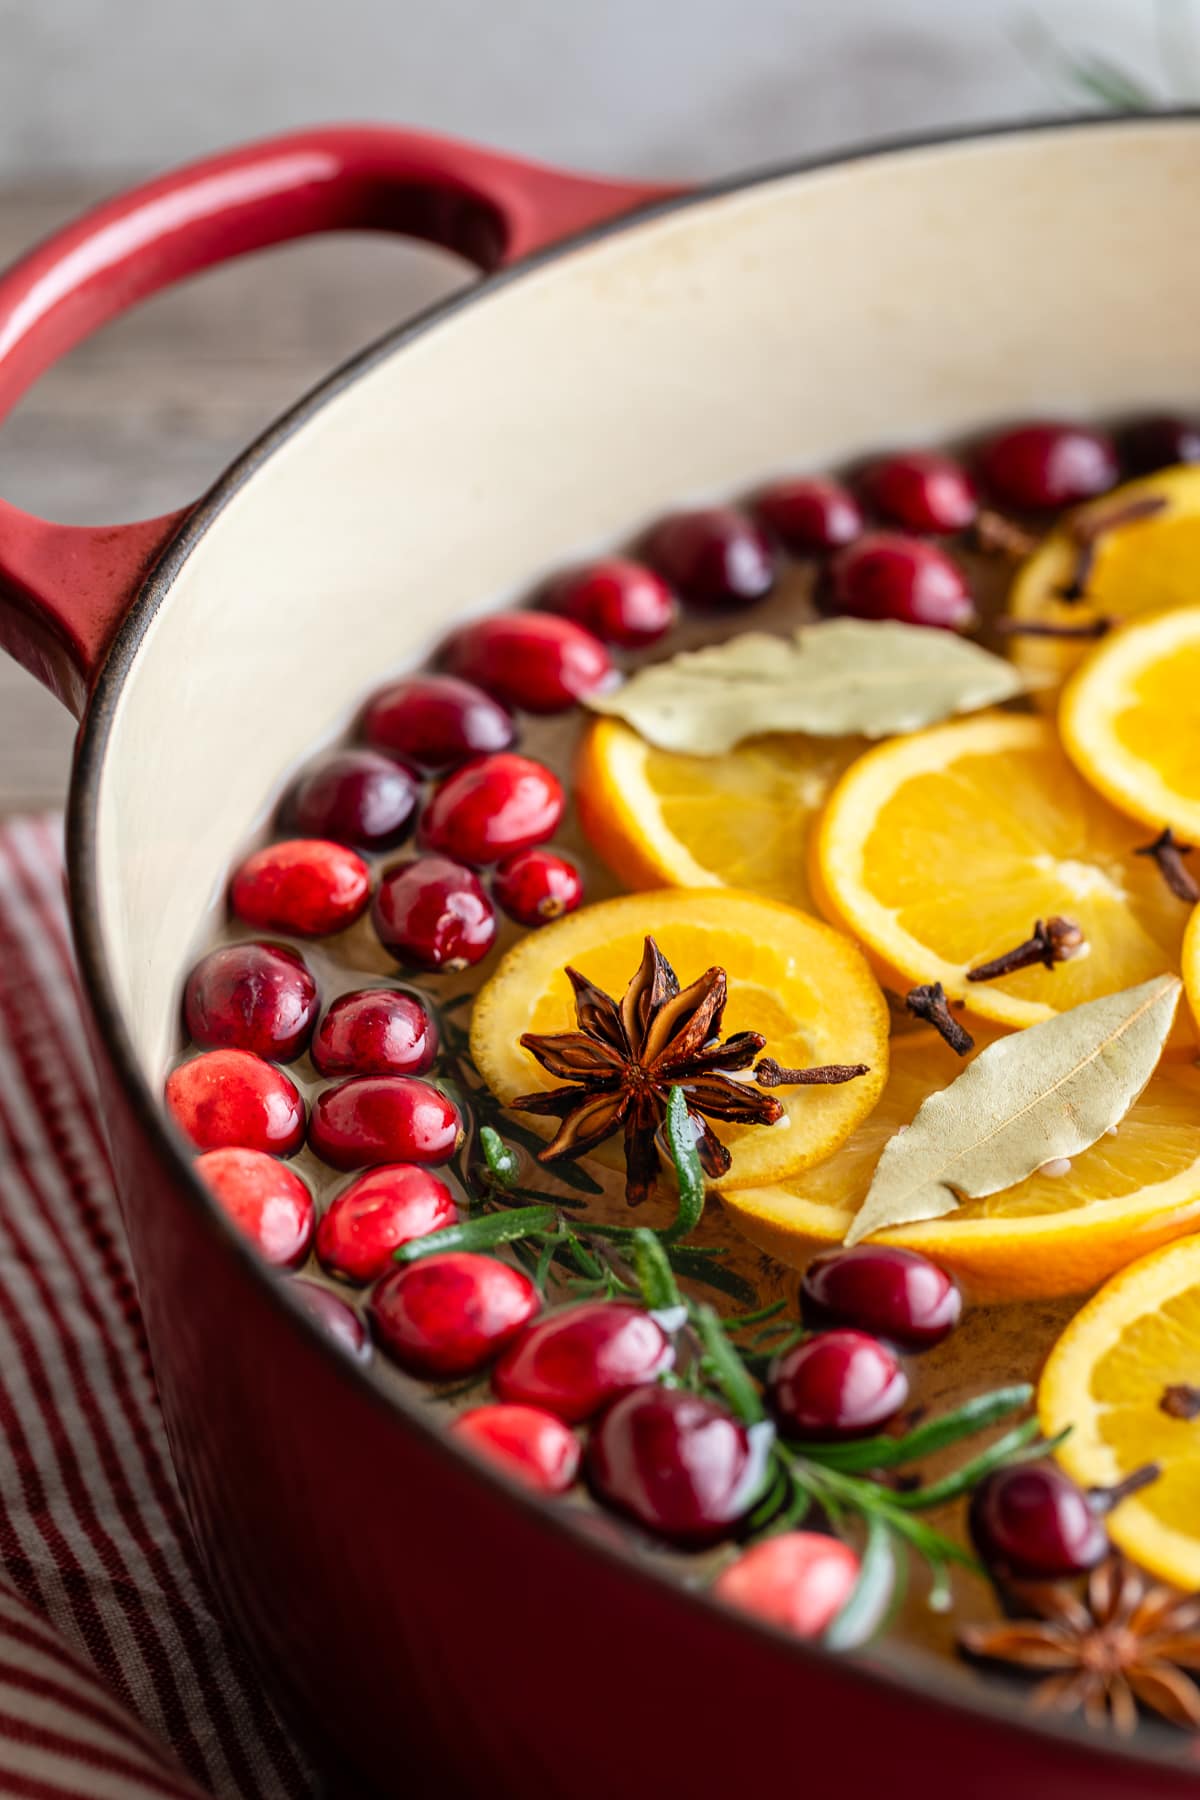 Dutch oven filled with simmer pot ingredients, including cranberries, cinnamon sticks, rosemary, orange slices, and star anise.